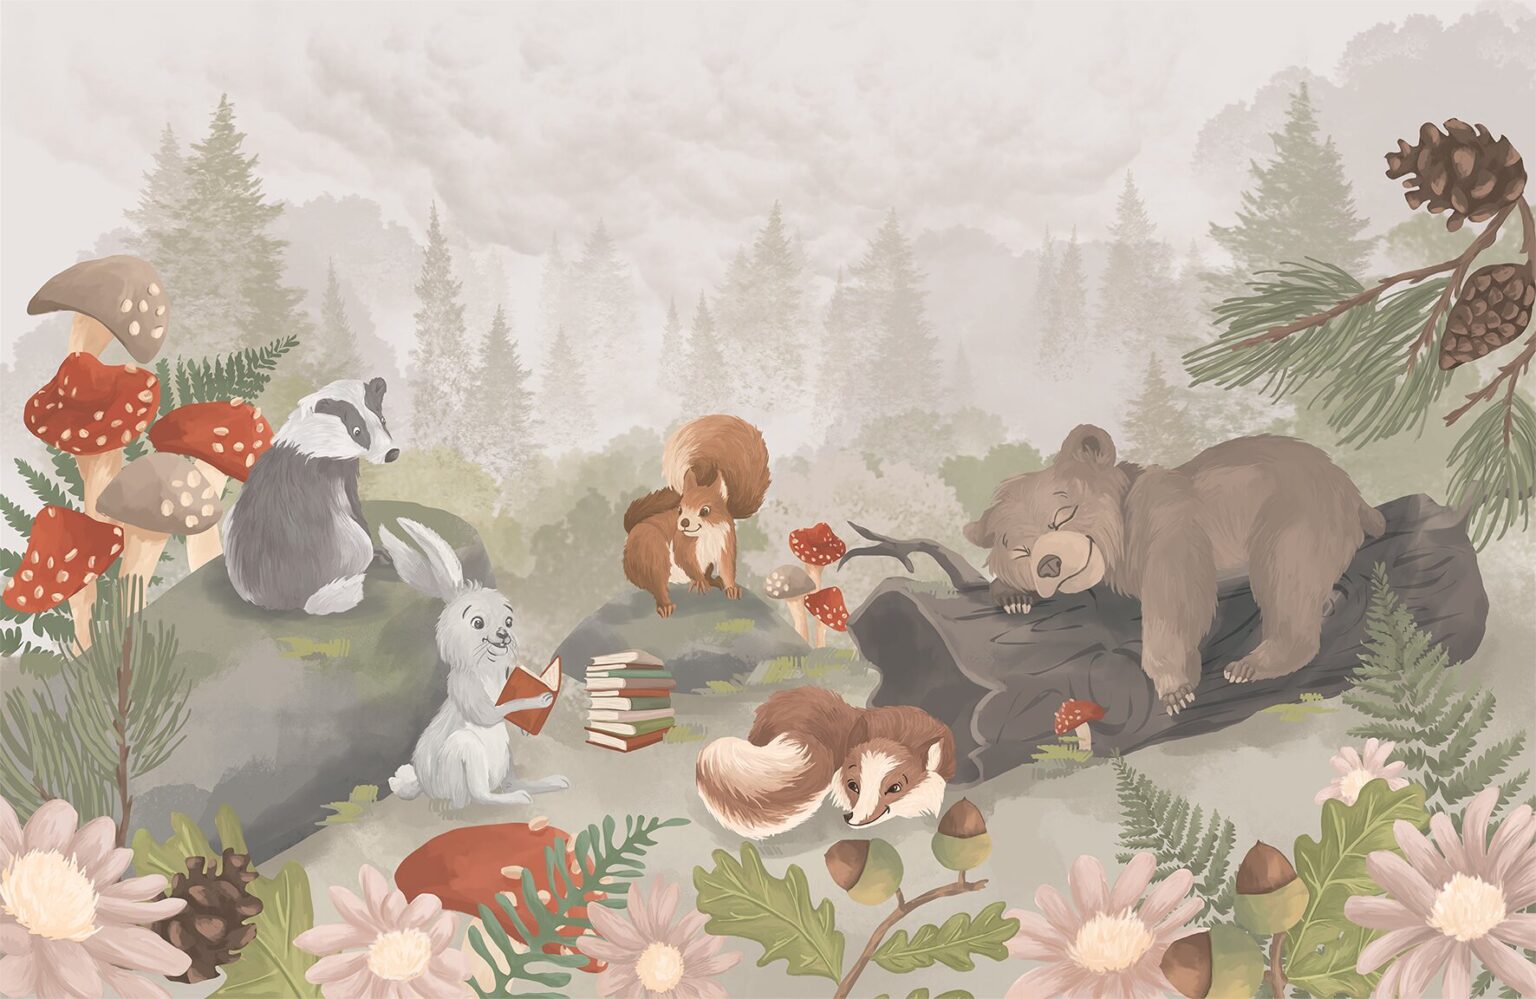 animals sleeping in the forest illustration